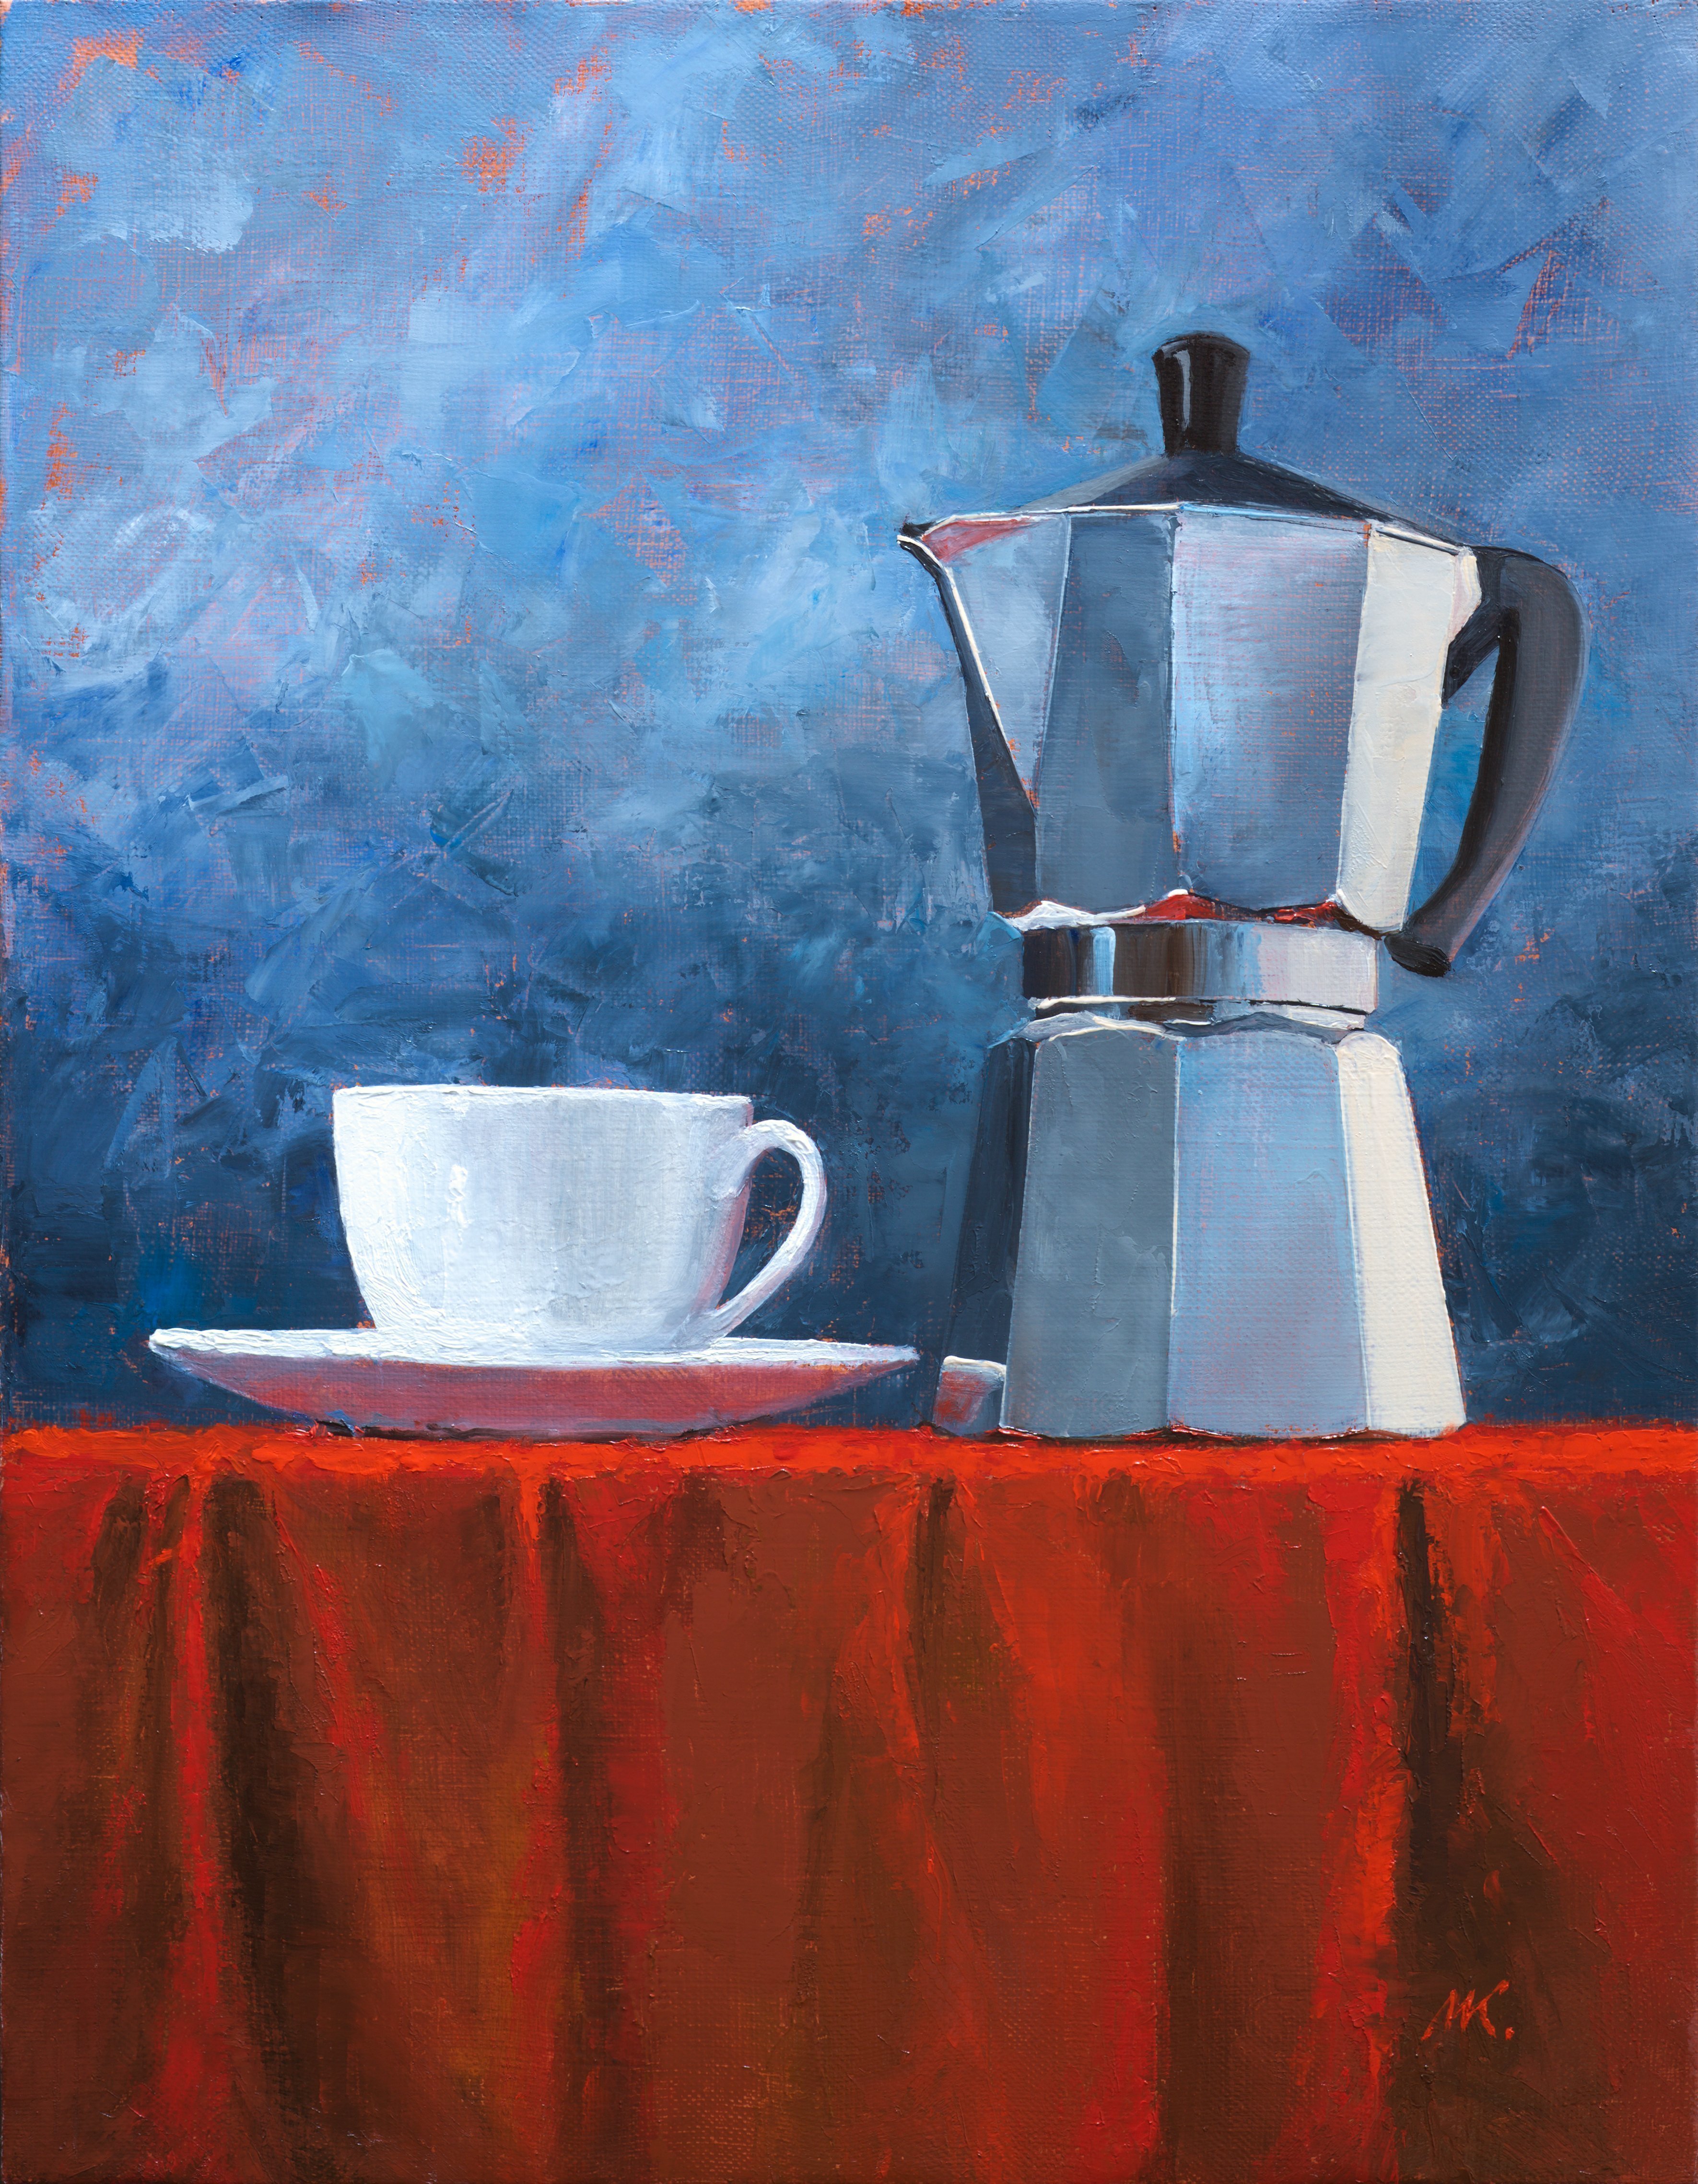 Mikhail Velavok; Moka , 2017, Original Painting Oil, 17.5 x 13.5 inches. Artwork description: 241 Original oil painting on canvas. The work is being sold unframed.cup, white cup, coffee, coffeepot, bialetti, moka pot, moka, mokha, red, wrinkle, fold, fabric, red fabric, tablecloth, still life, roasted coffee, dark roasted coffee...